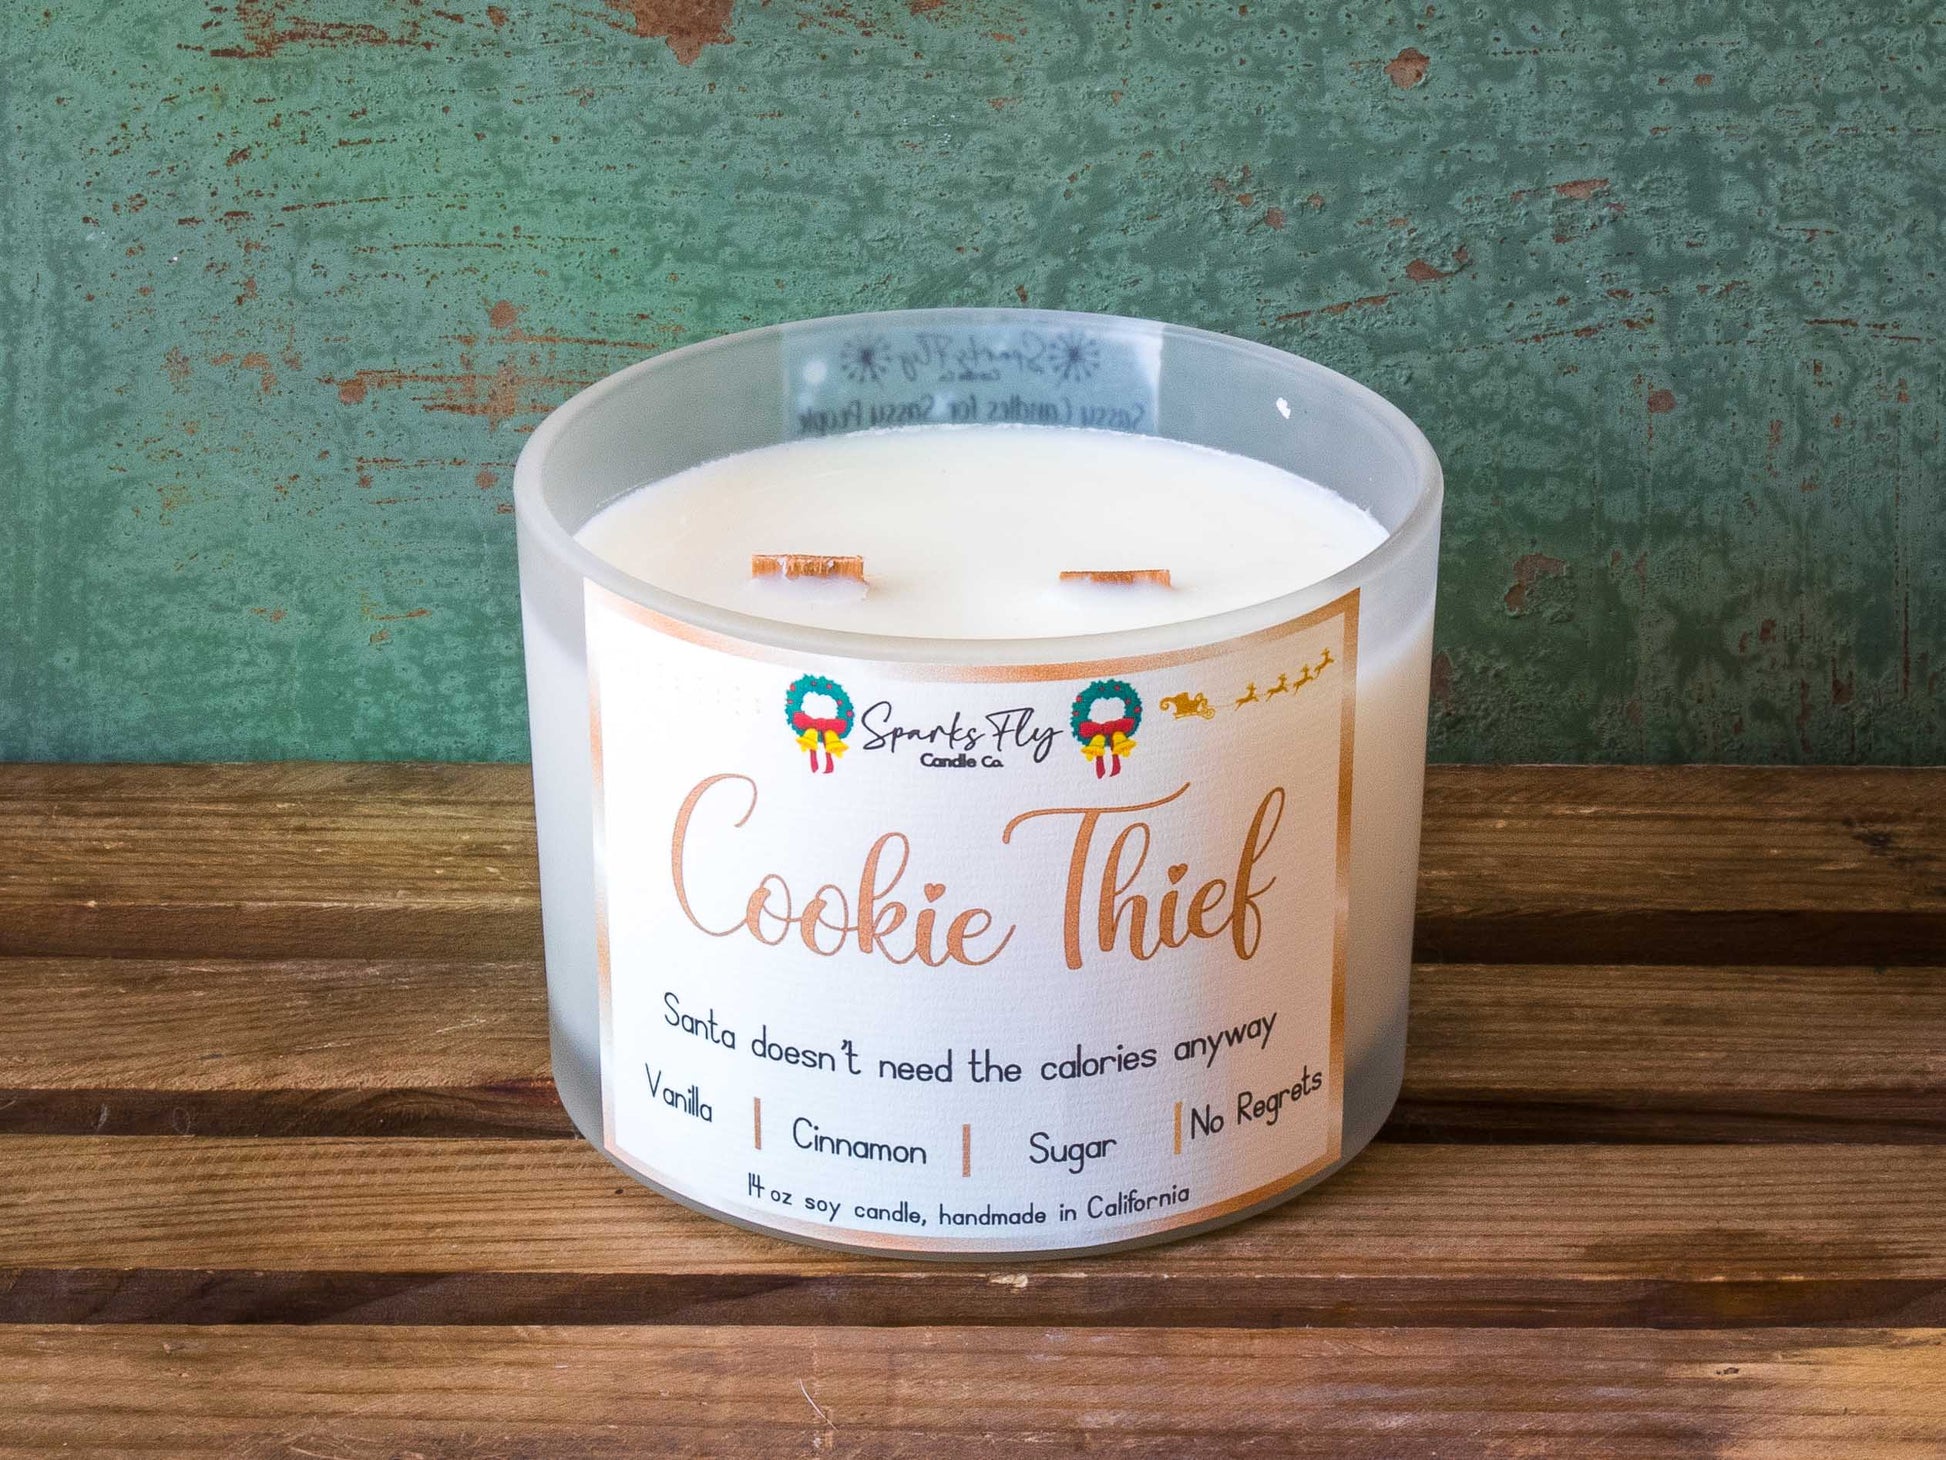 Cookie Thief Sassy Candle; saving Santa from extra calories!